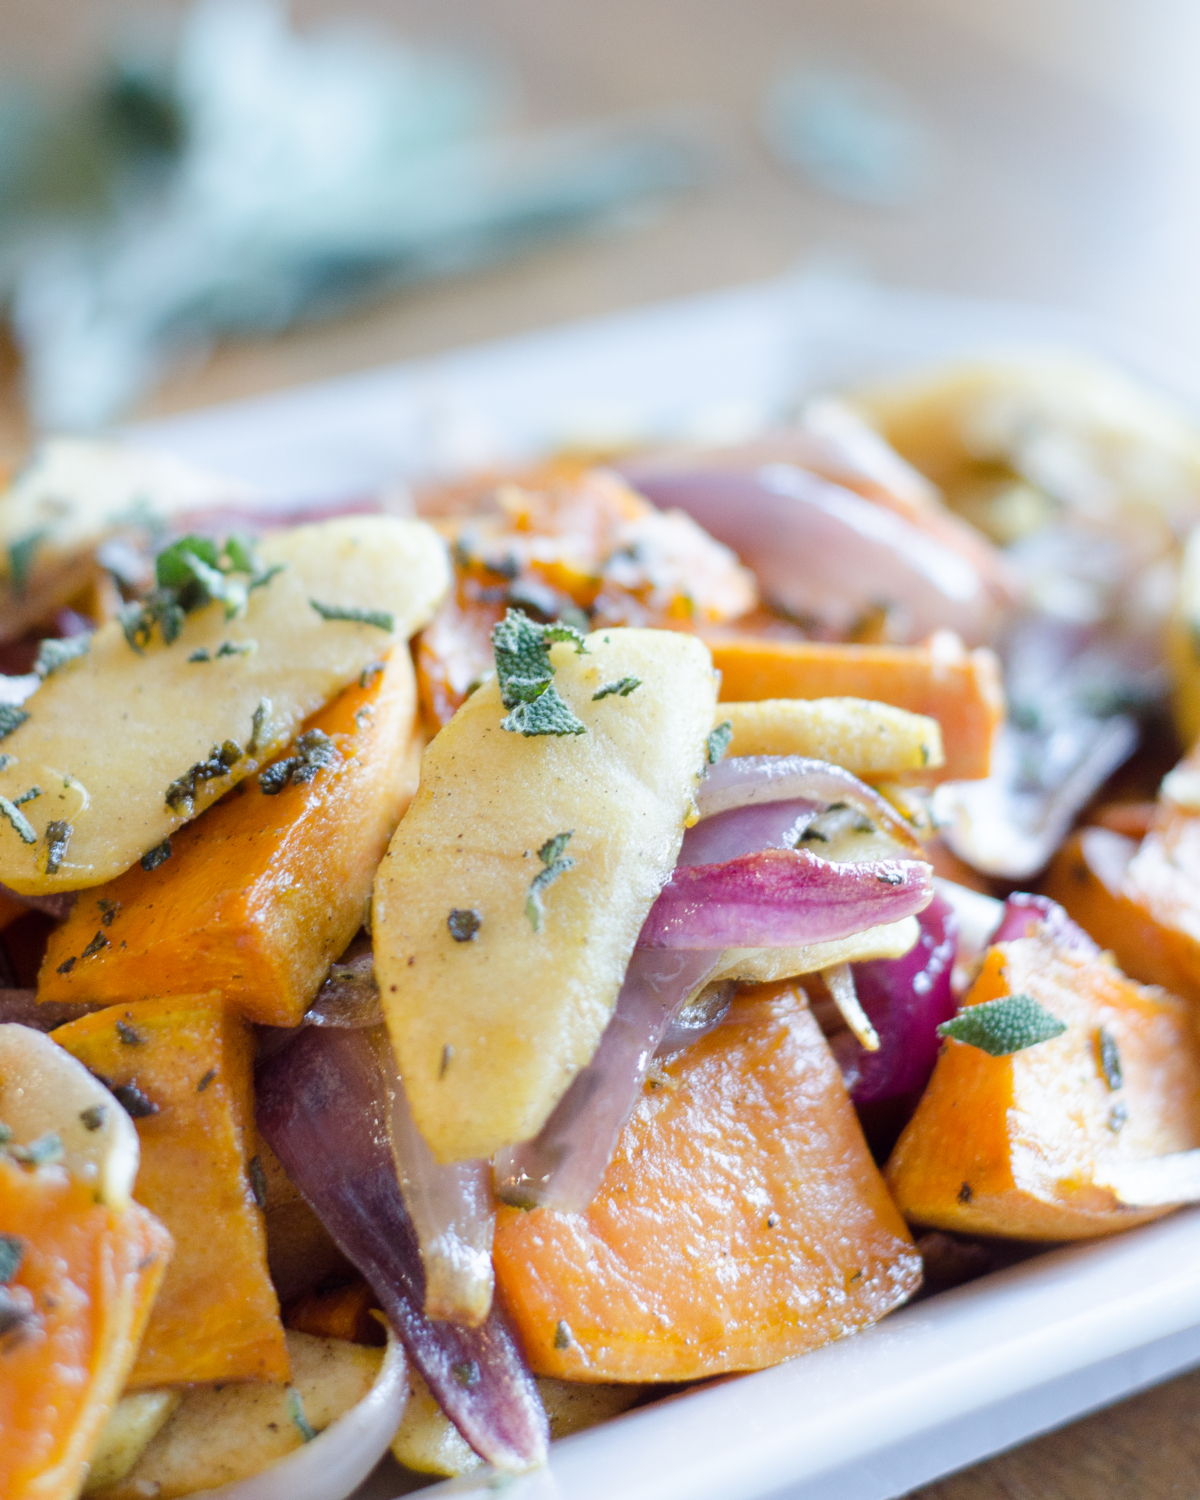 Recipe for roasted sweet potatoes and apples. An easy and delicious fall or winter side dish. Would be an excellent easy Thanksgiving side dish too!